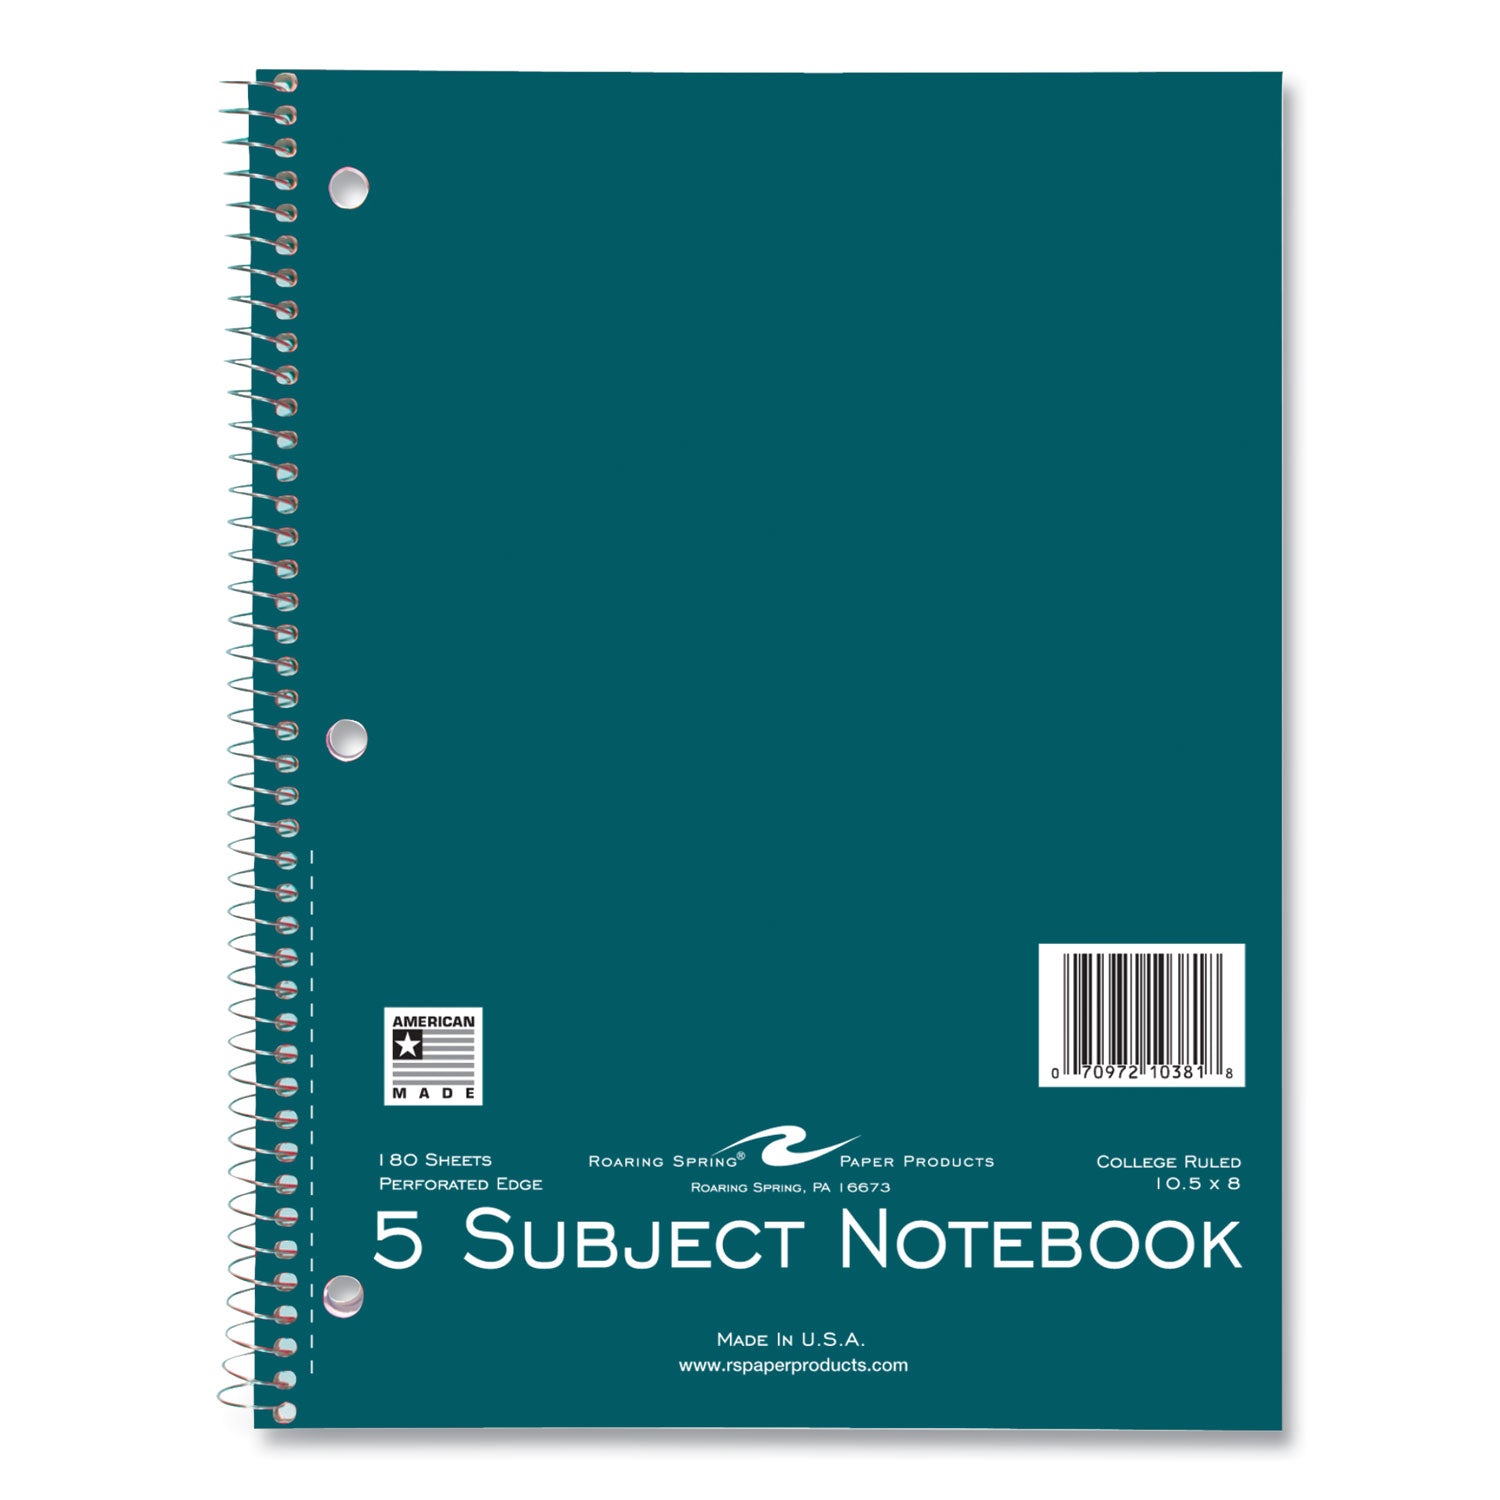 subject-wirebound-notebook-5-subject-medium-college-rule-asst-cover-180-105-x-8-sheets-12-ct-ships-in-4-6-bus-days_roa10381cs - 2